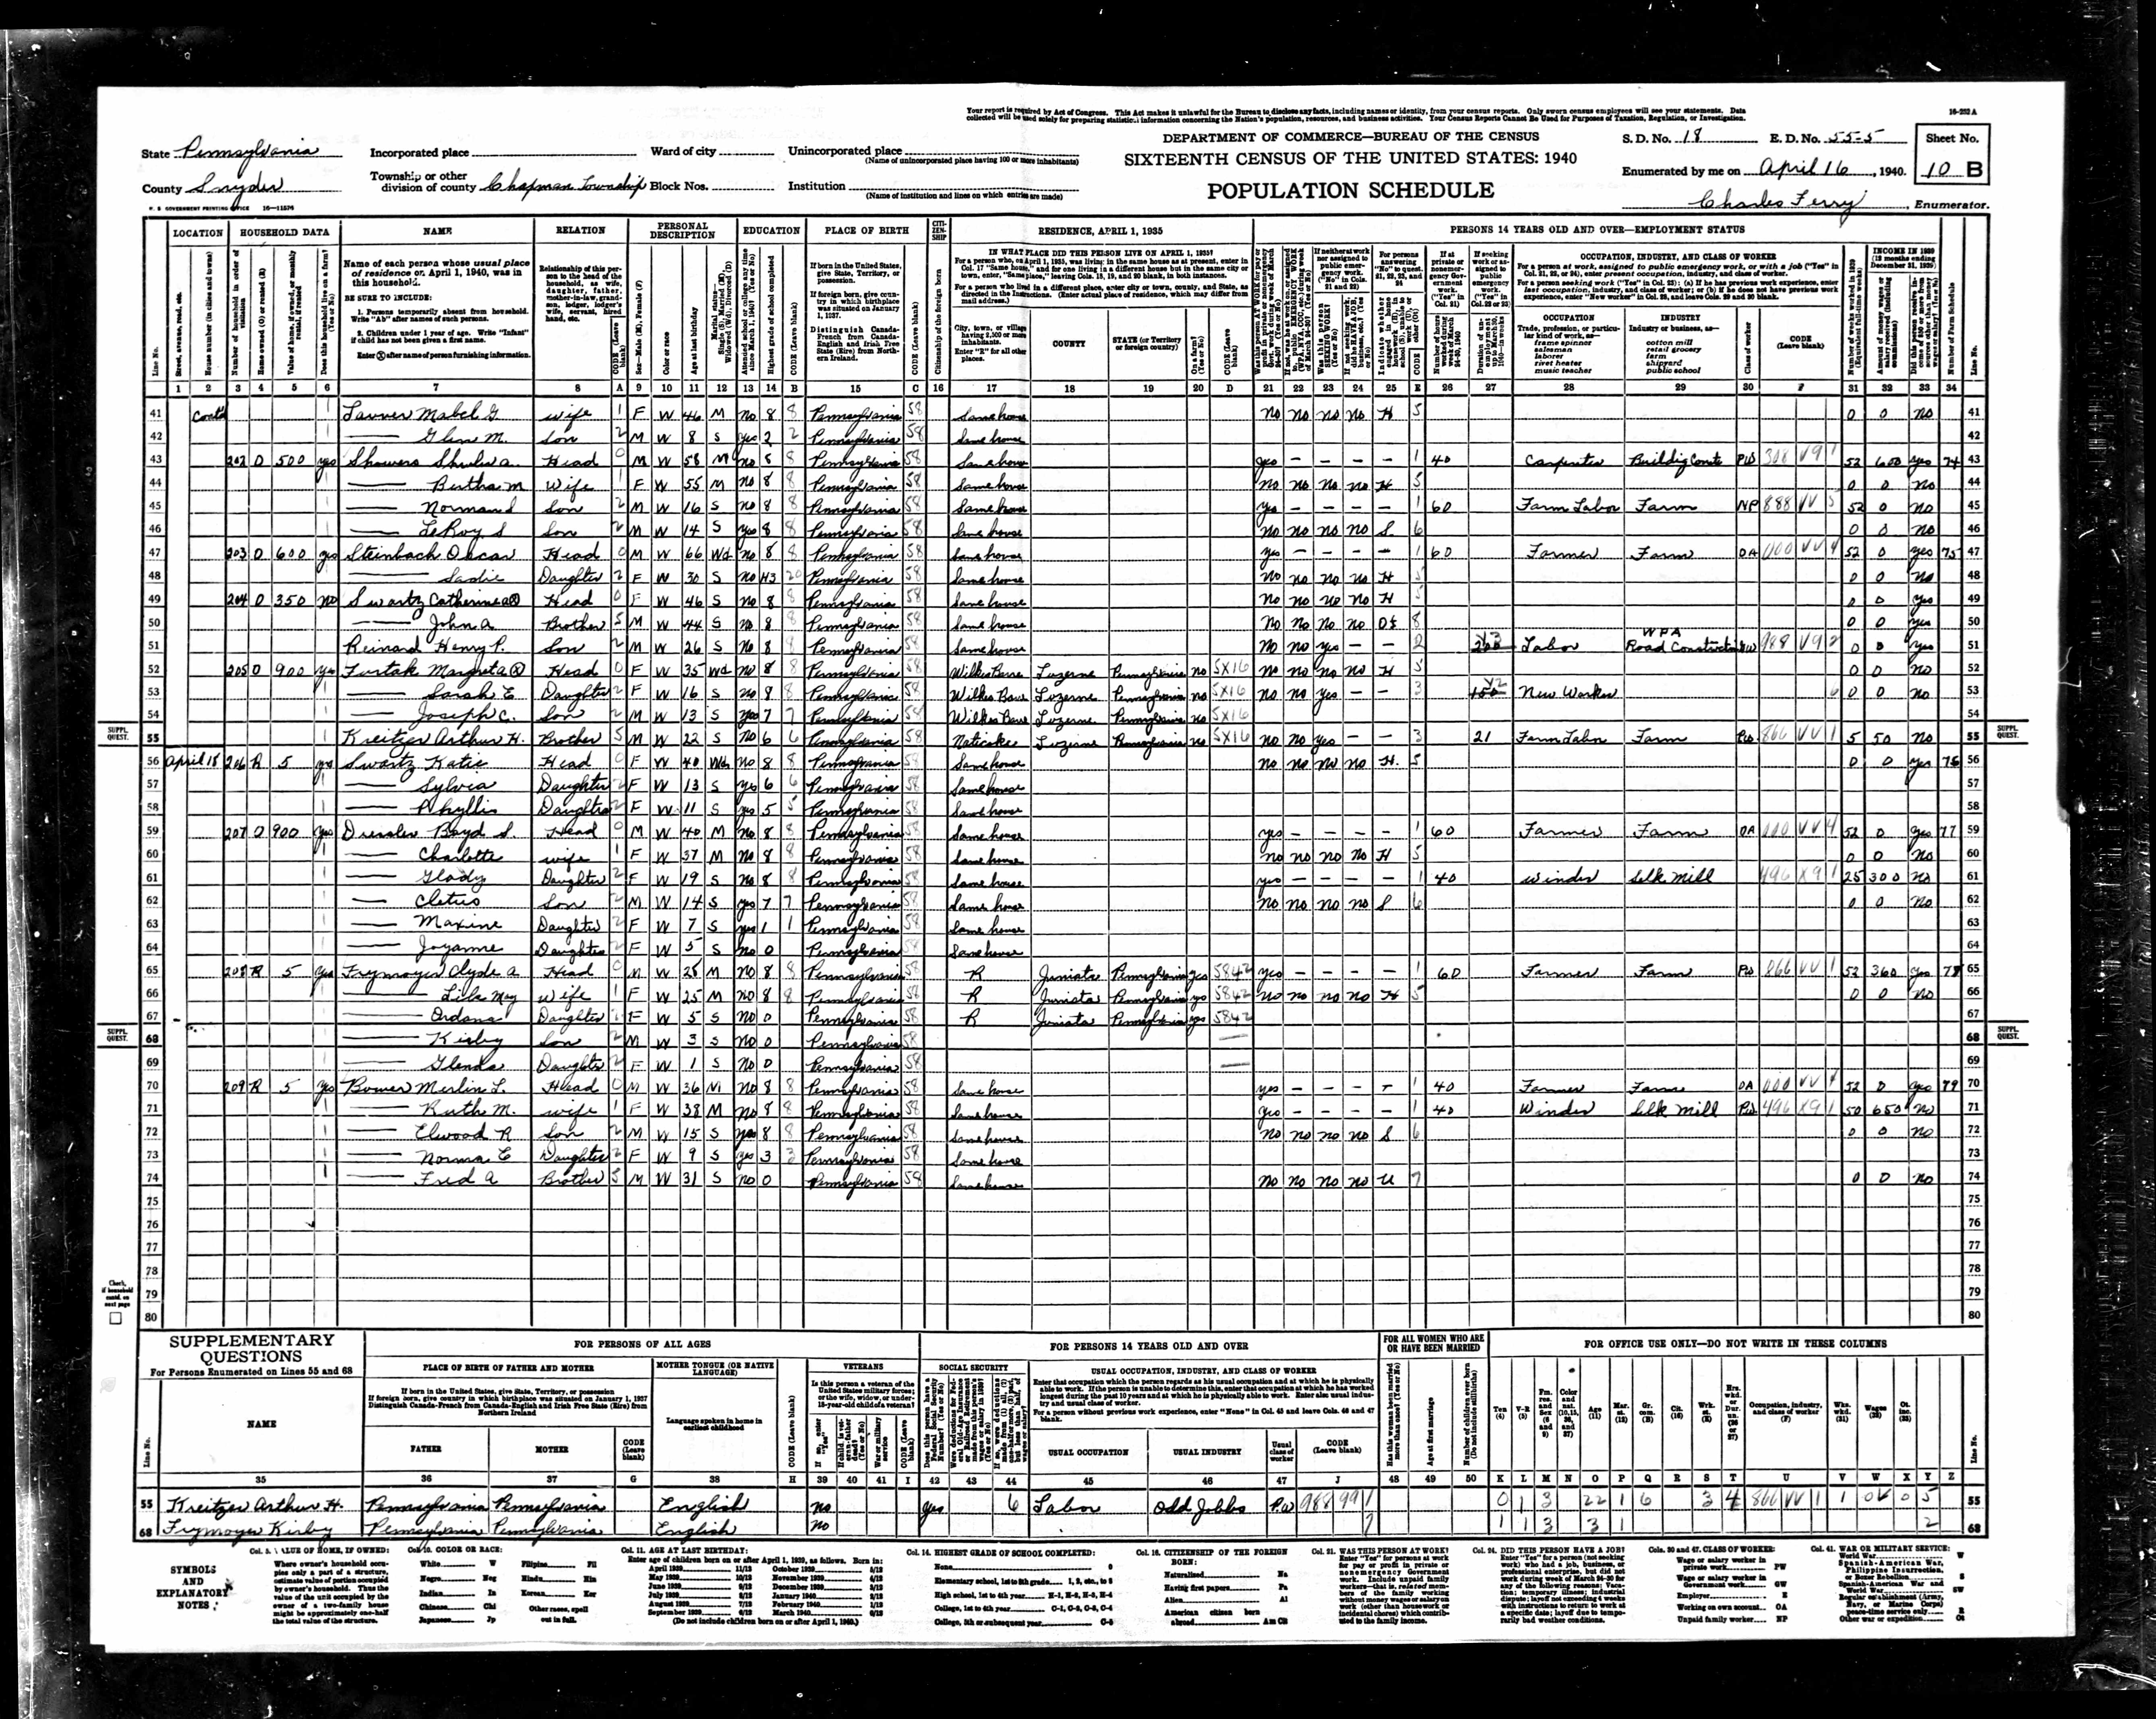 Clyde Austin Frymoyer -  1940 United States Federal Census